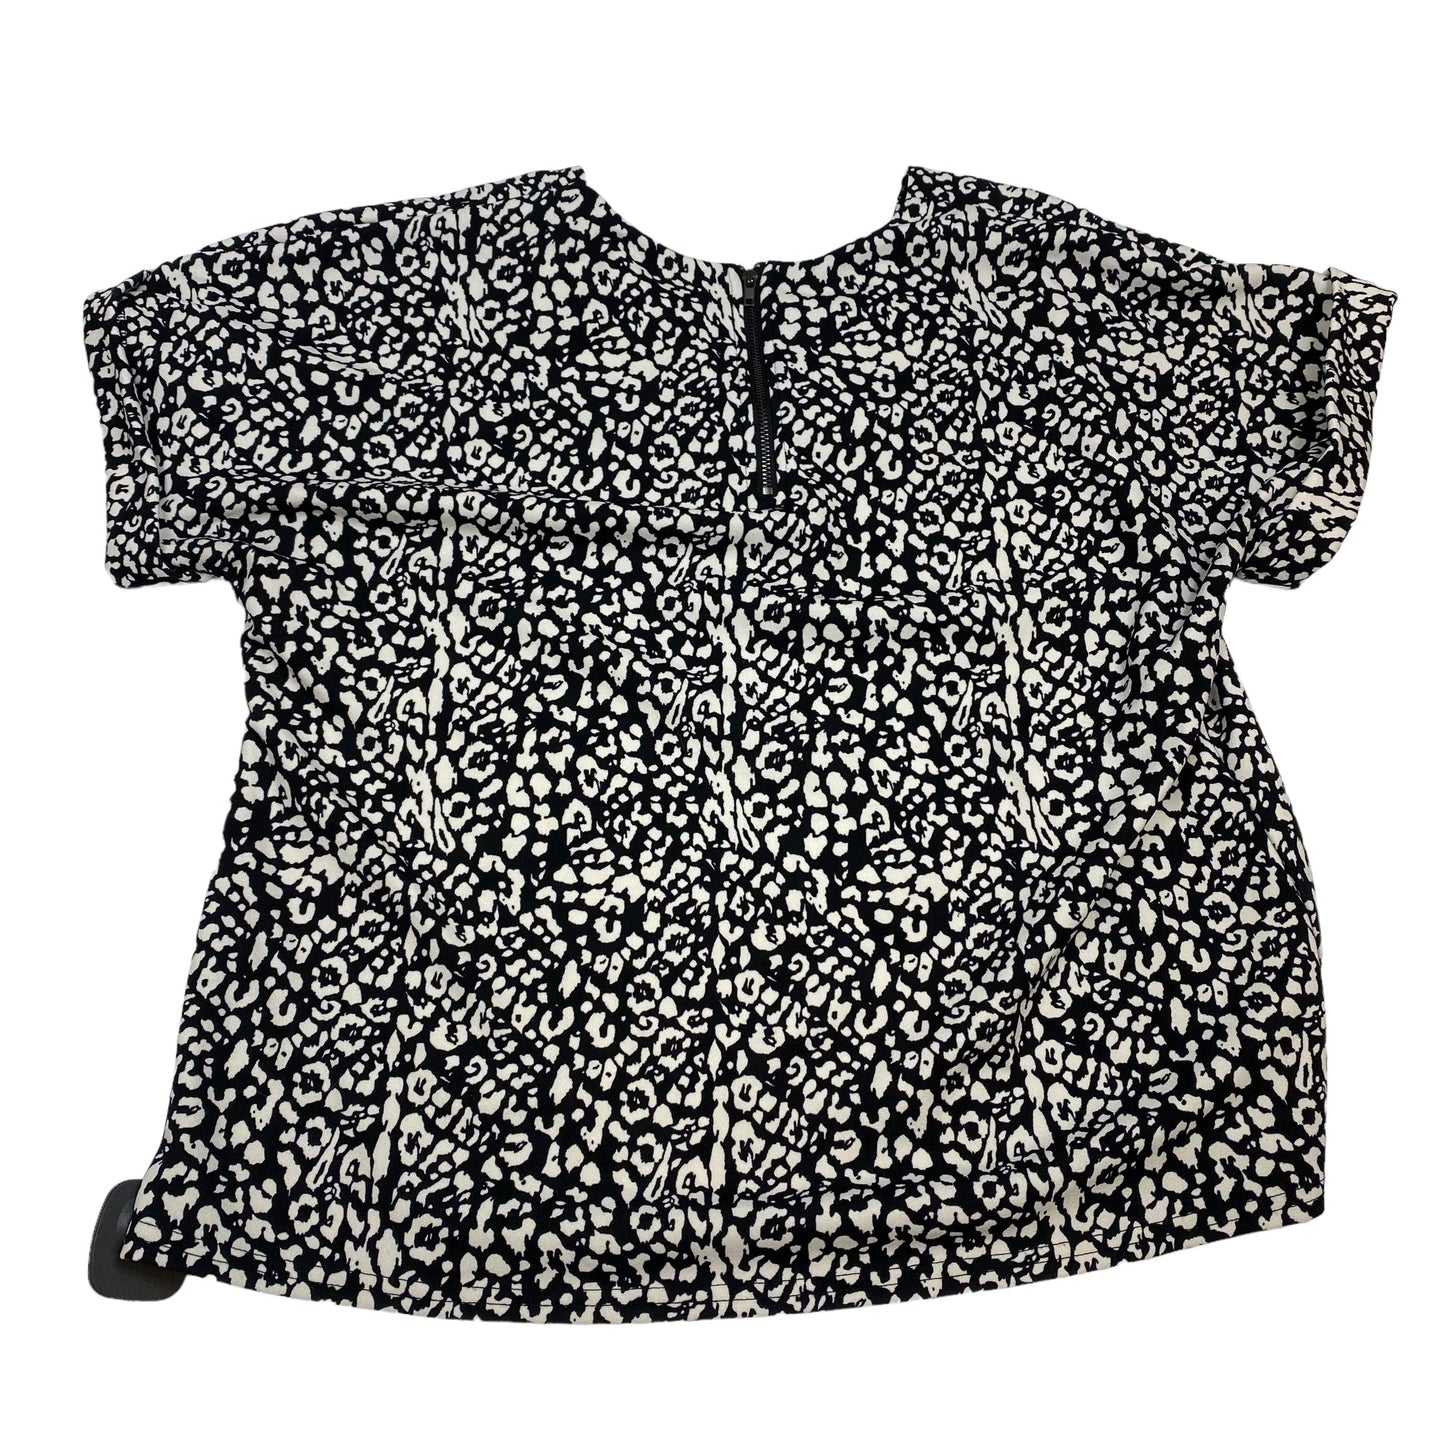 Top Short Sleeve By Melloday  Size: M